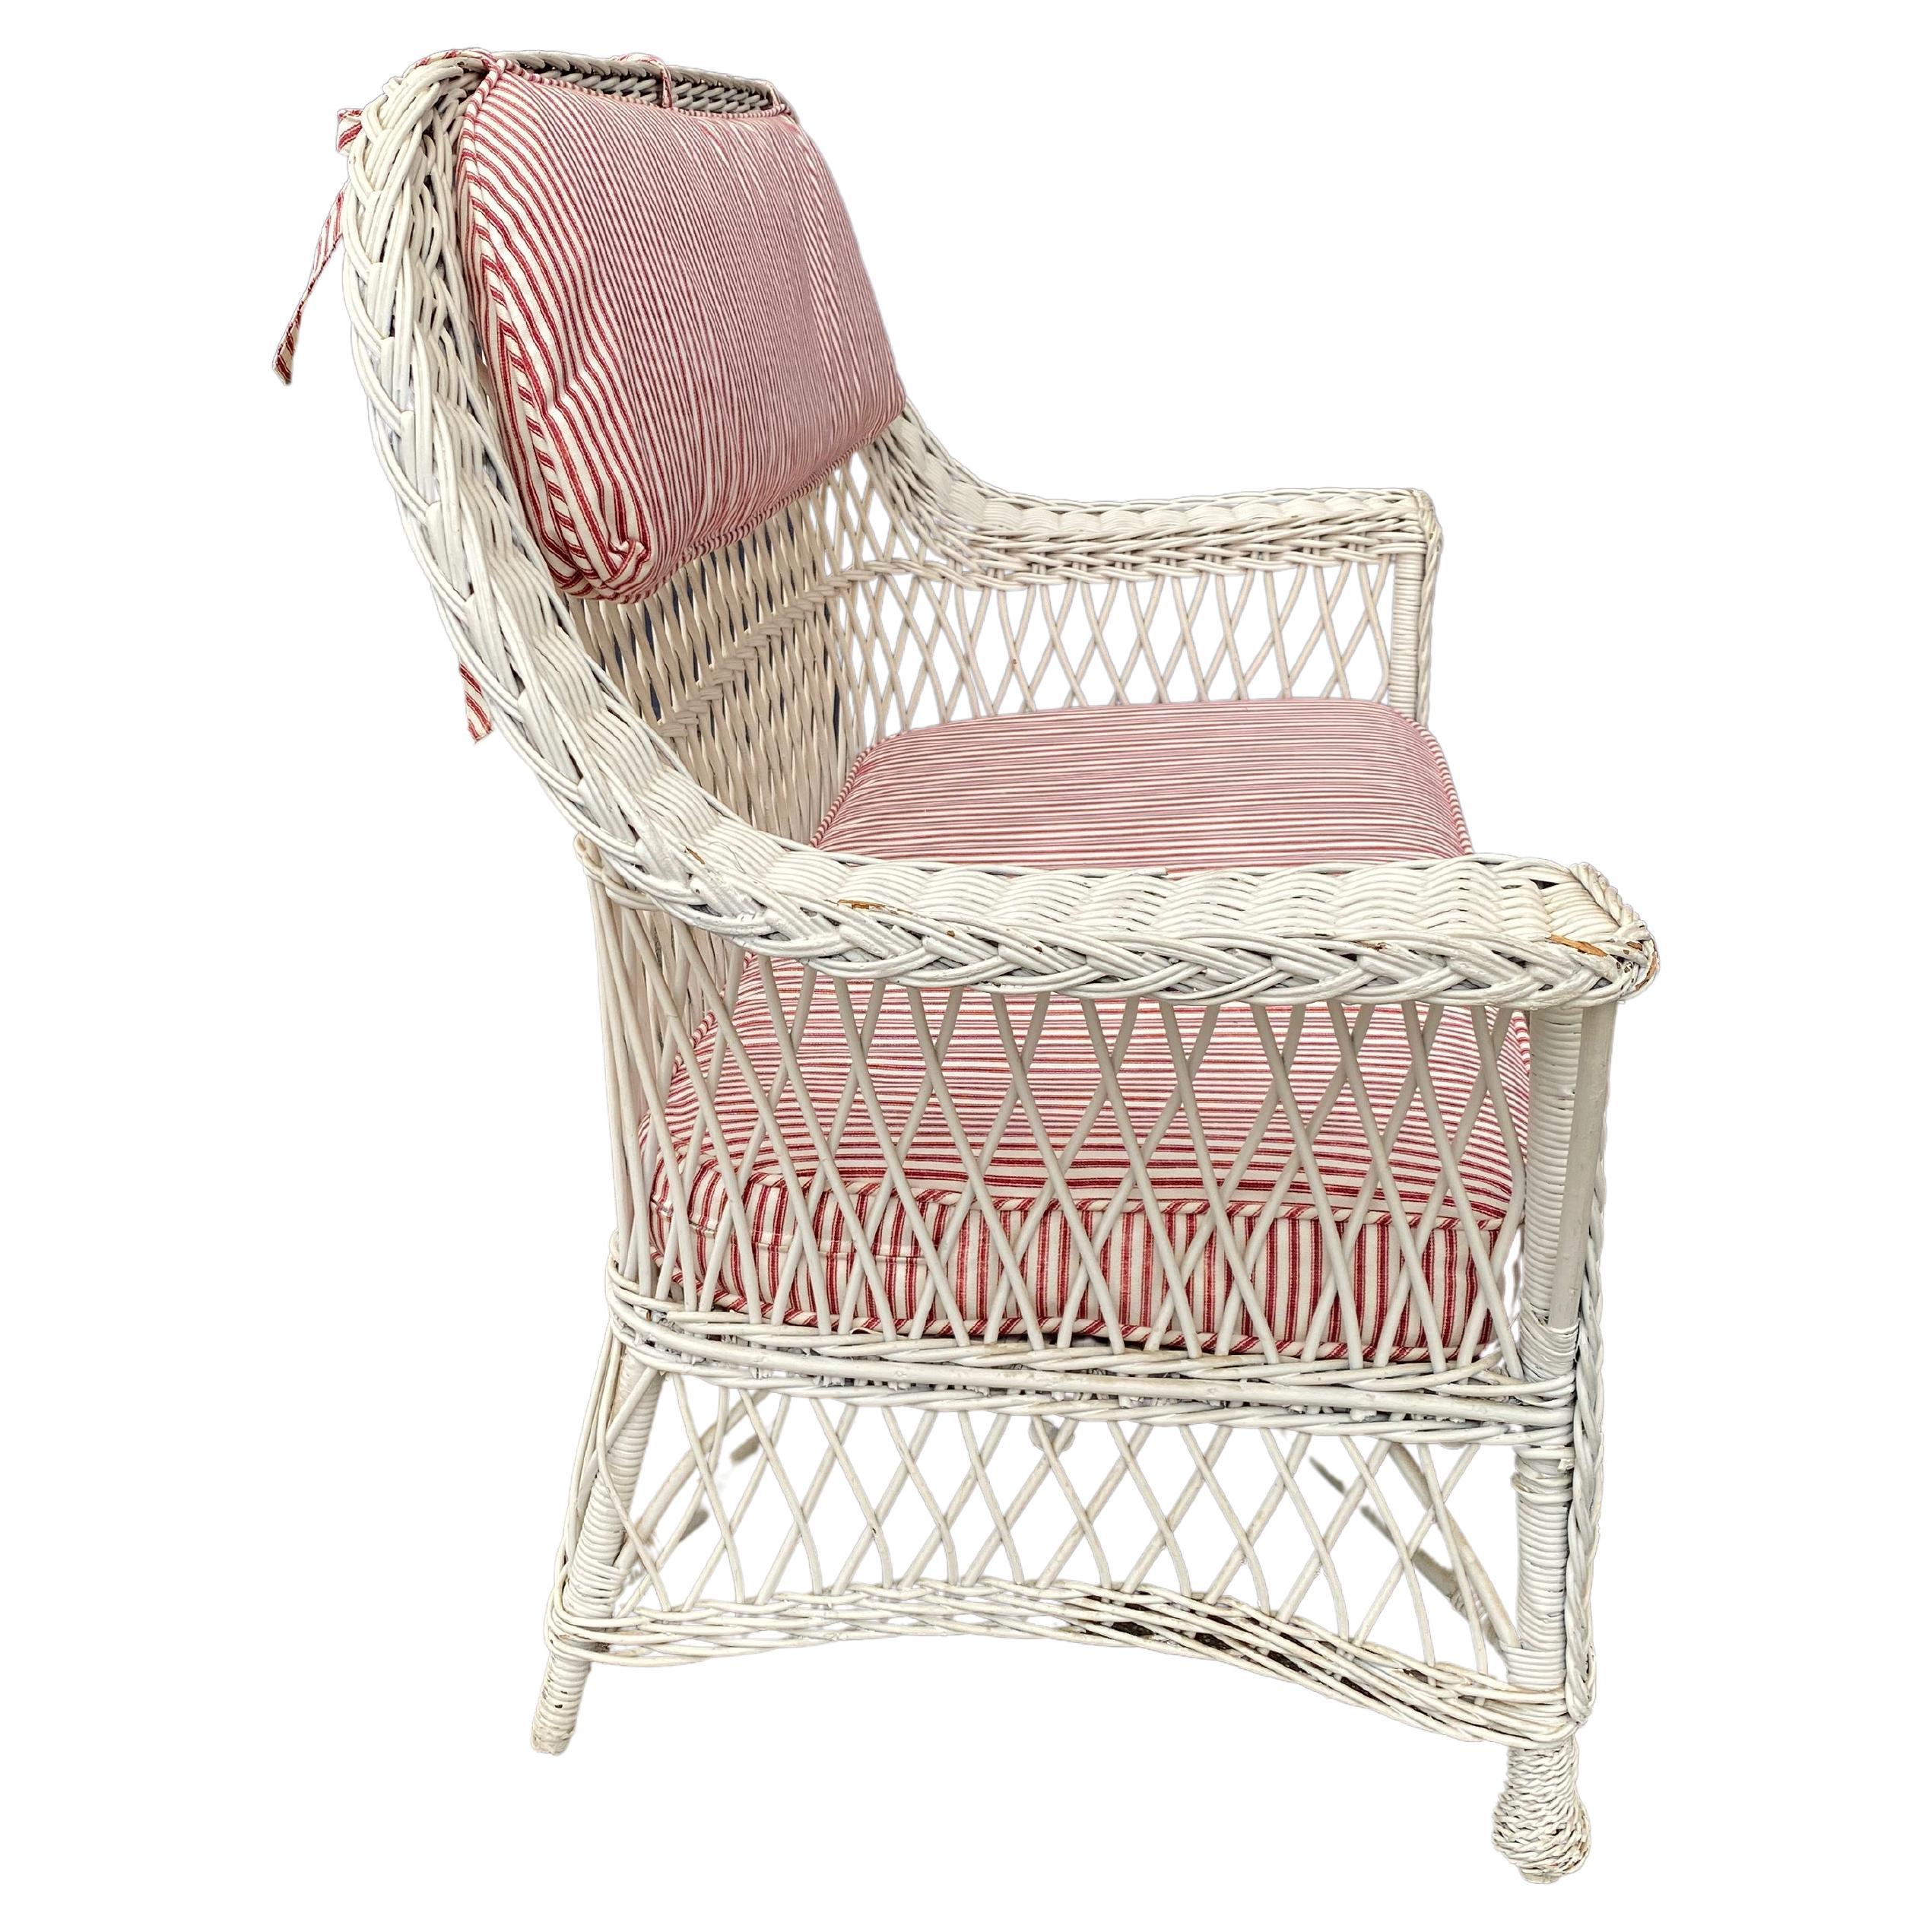 This is a very good example of a Bar Harbor Wicker settee that dates to the first half of the 20th century and is a great example of the current coastal decorating trend. The settee is in remarkably good original condition (it has been repainted in